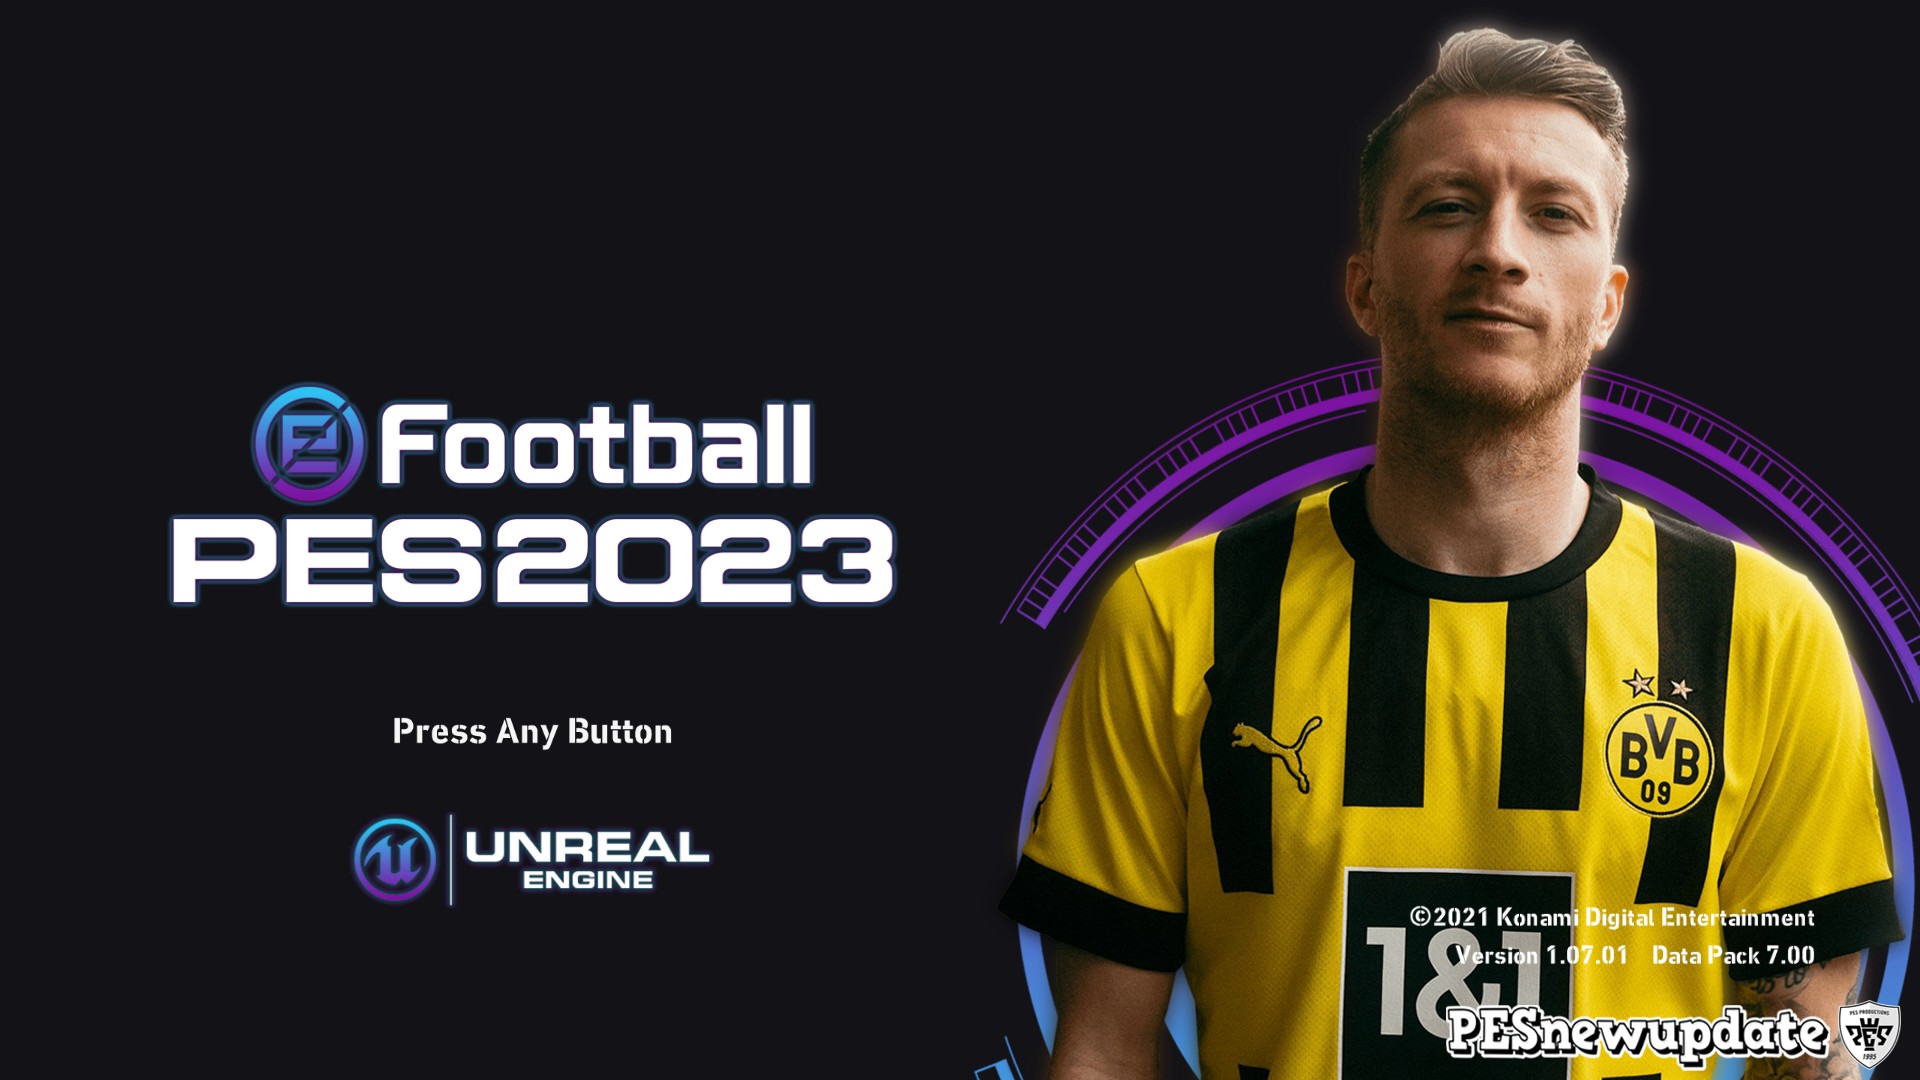 PES 2023 CONCEPT Menu by PESNewupdate PESNewupdate.com. Free Download Latest Pro Evolution Soccer Patch & Updates